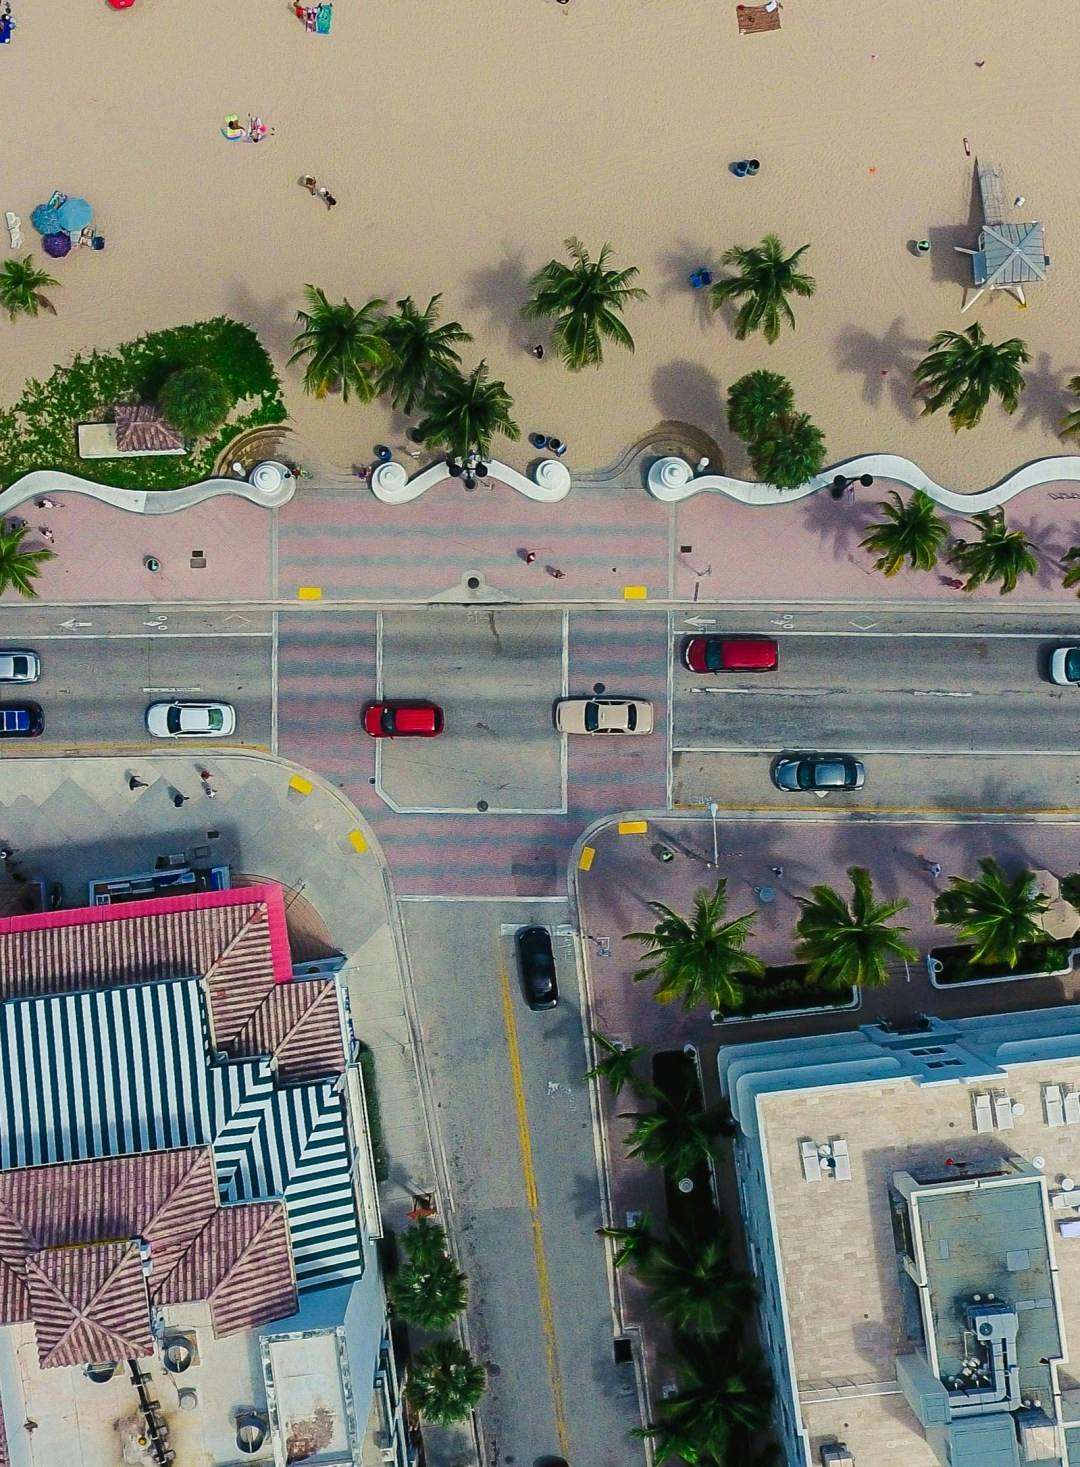 An Aerial shot of a street in Fort Lauderdale